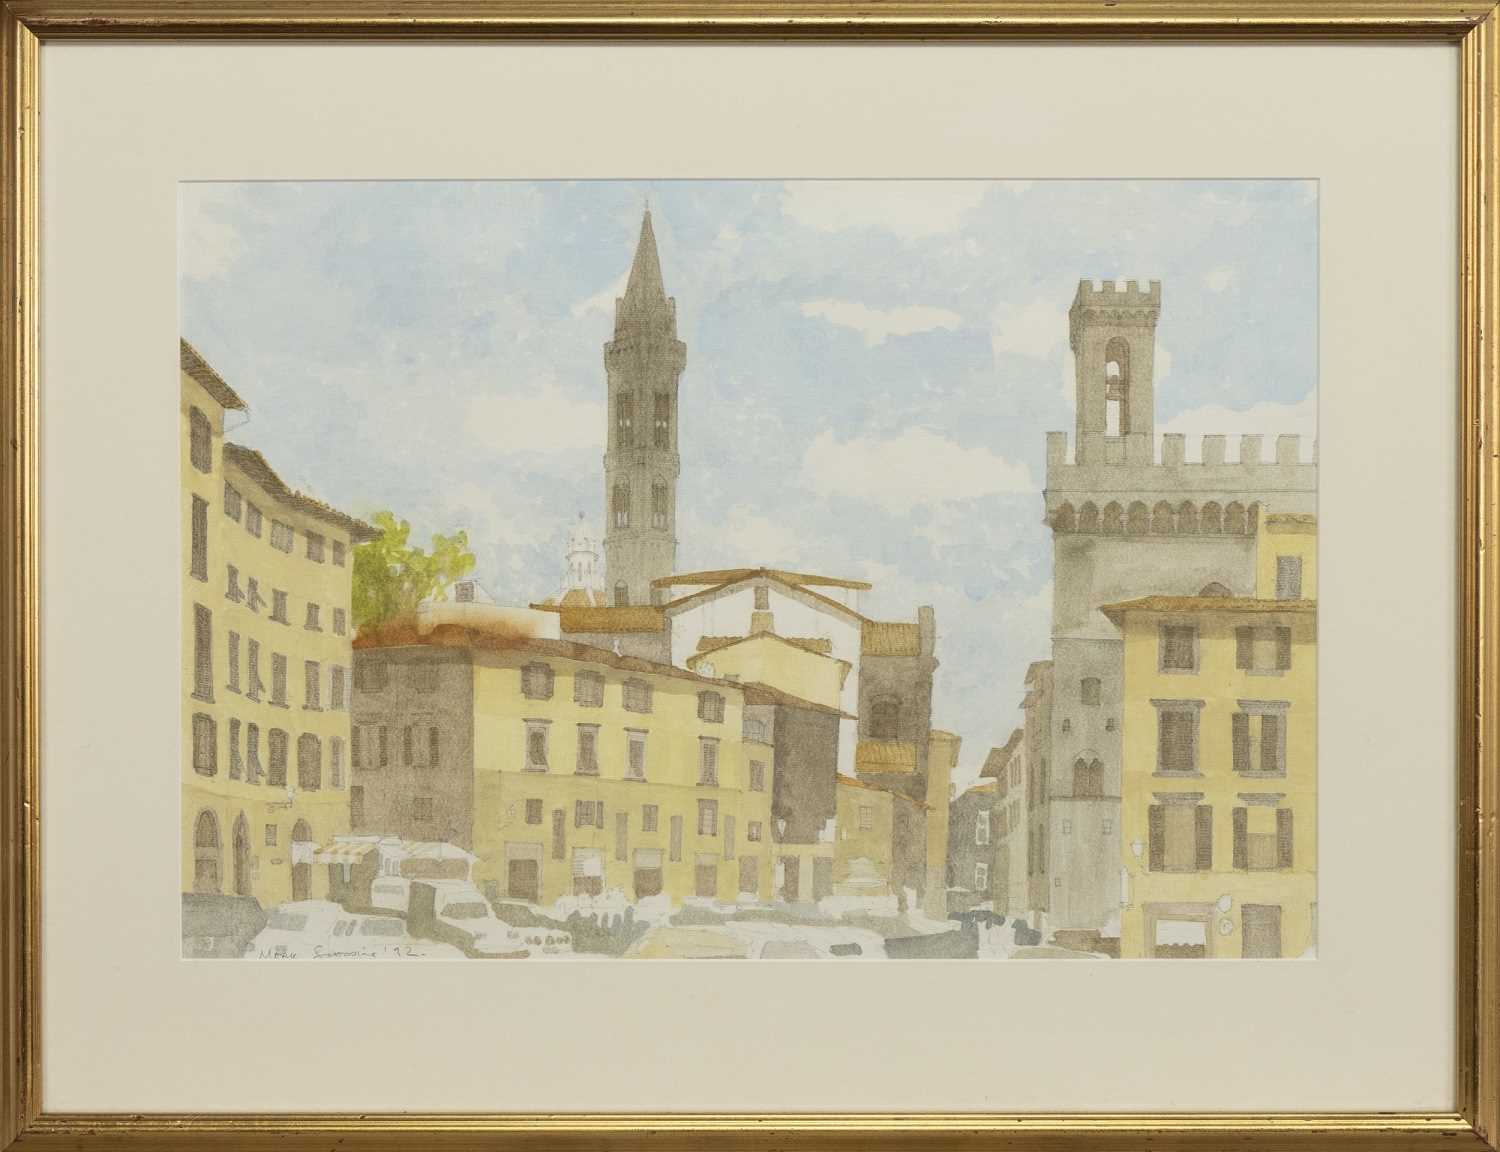 STREET SCENE IN FLORENCE, A WATERCOLOUR BY MARK SCADDING